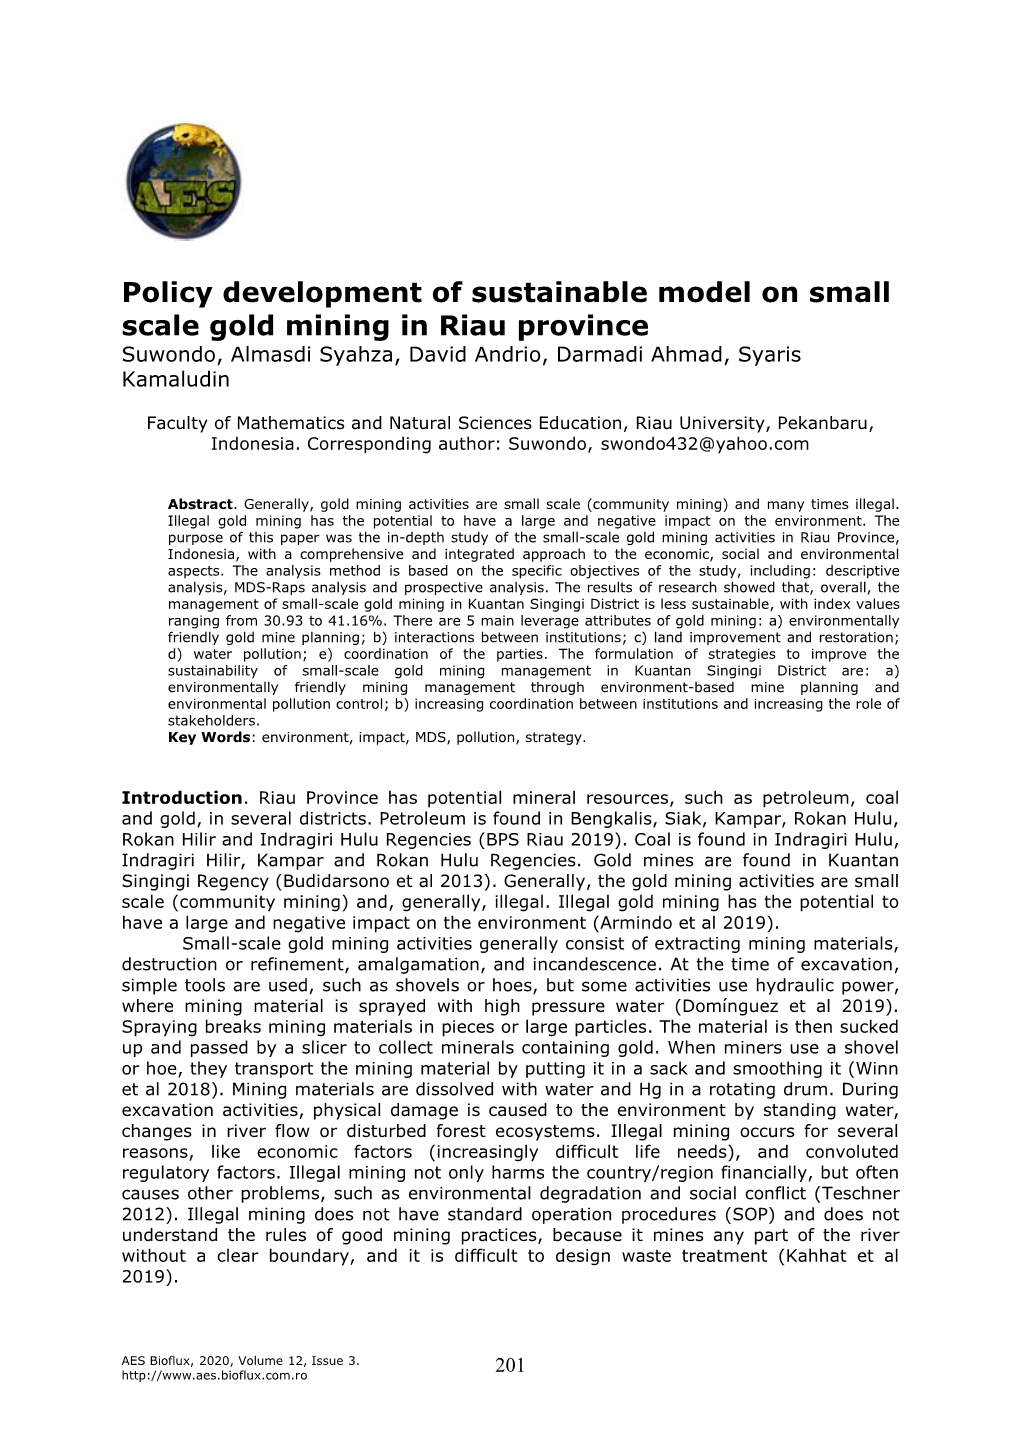 Suwondo, Syahza A., Andrio D., Ahmad D., Kamaludin S., 2020 Policy Development of Sustainable Model on Small Scale Gold Mining in Riau Province